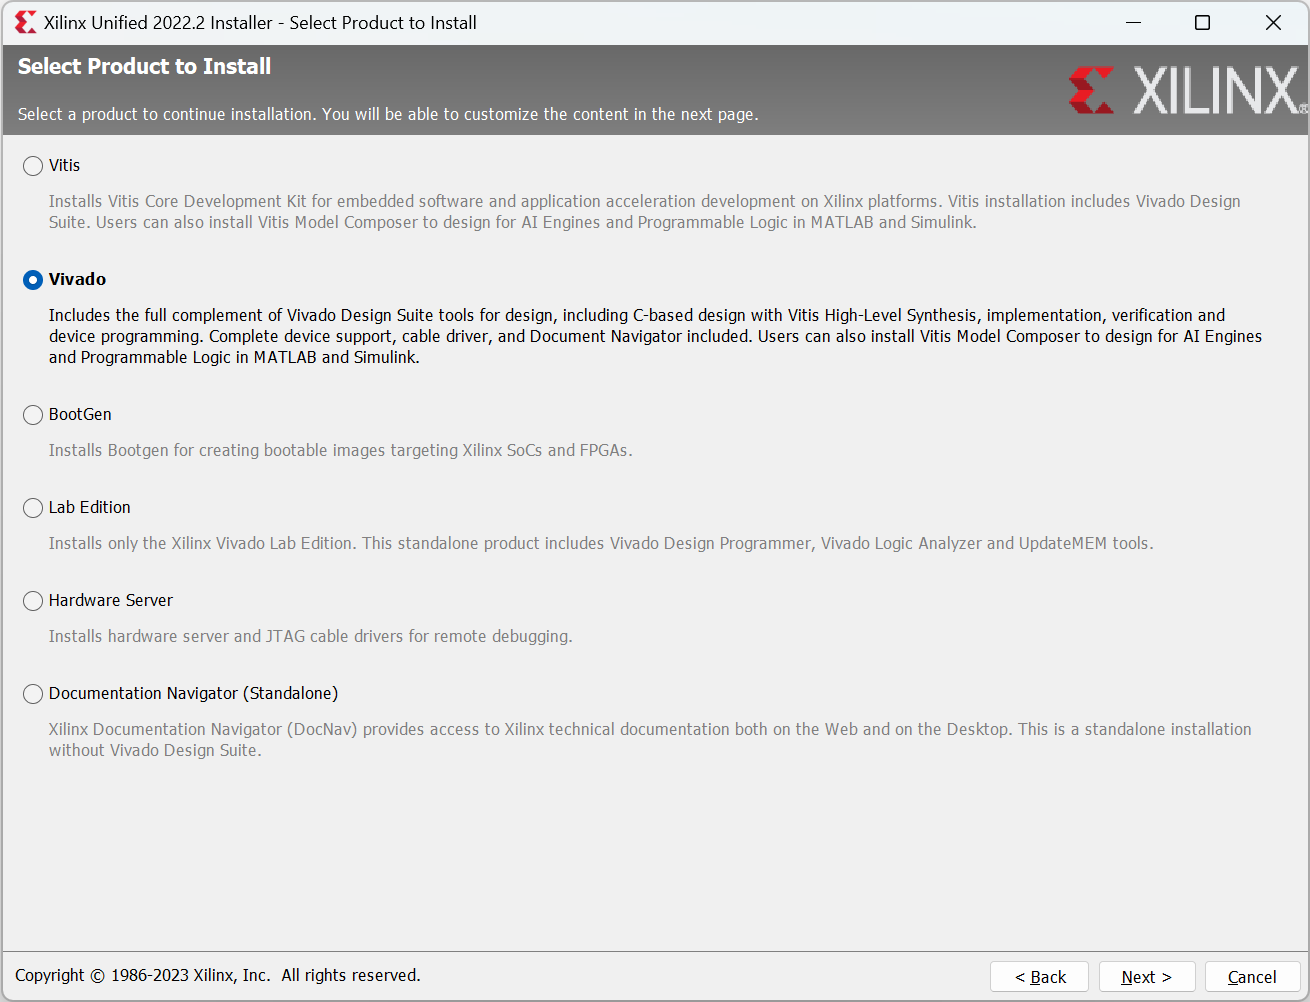 Xilinx Unified Installer "Select Product to Install" Page Screenshot